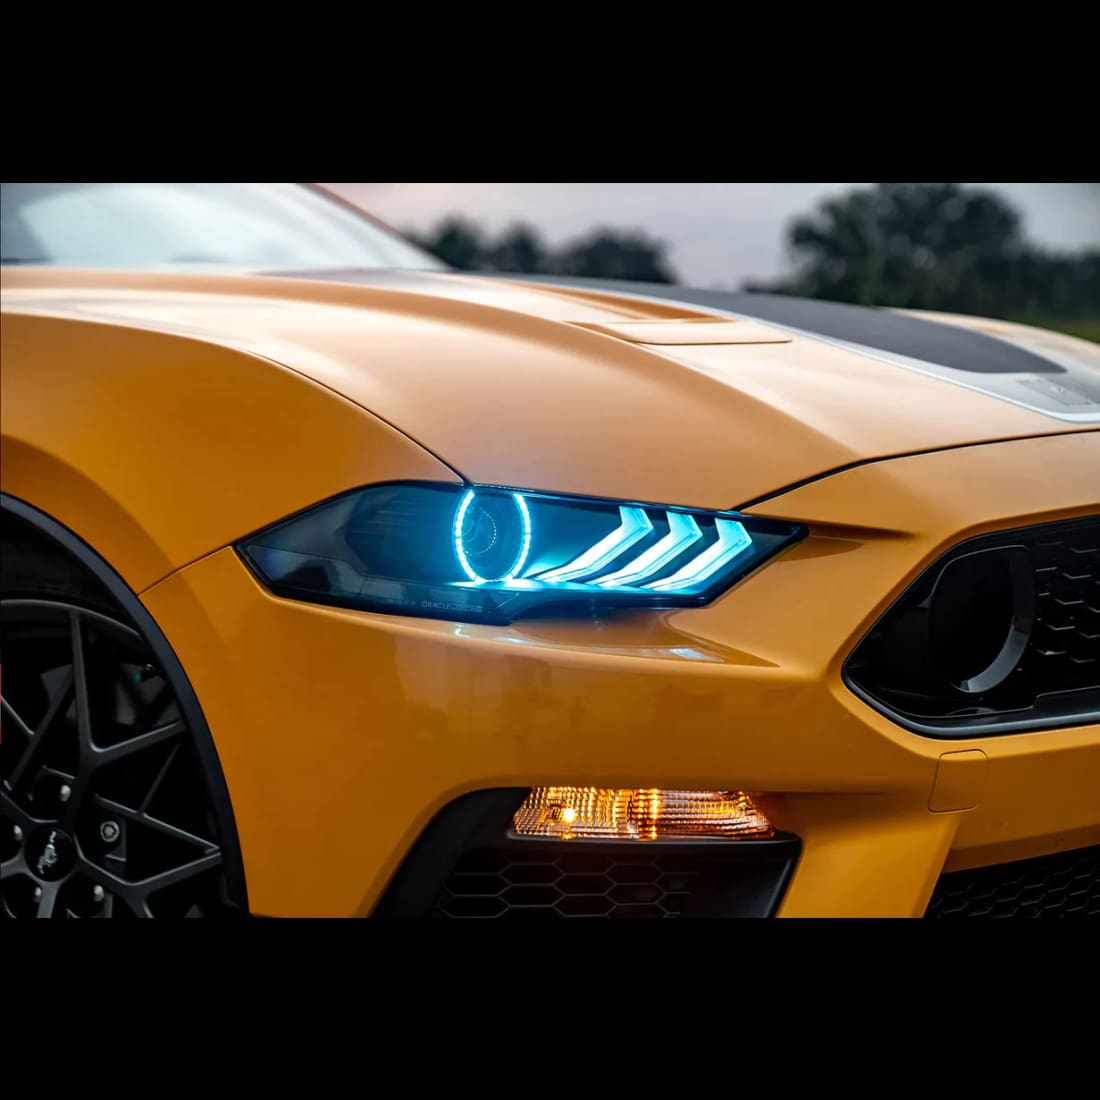 2018-2023 Mustang ORACLE Pre-Assembled Black Series ColorSHIFT Headlights